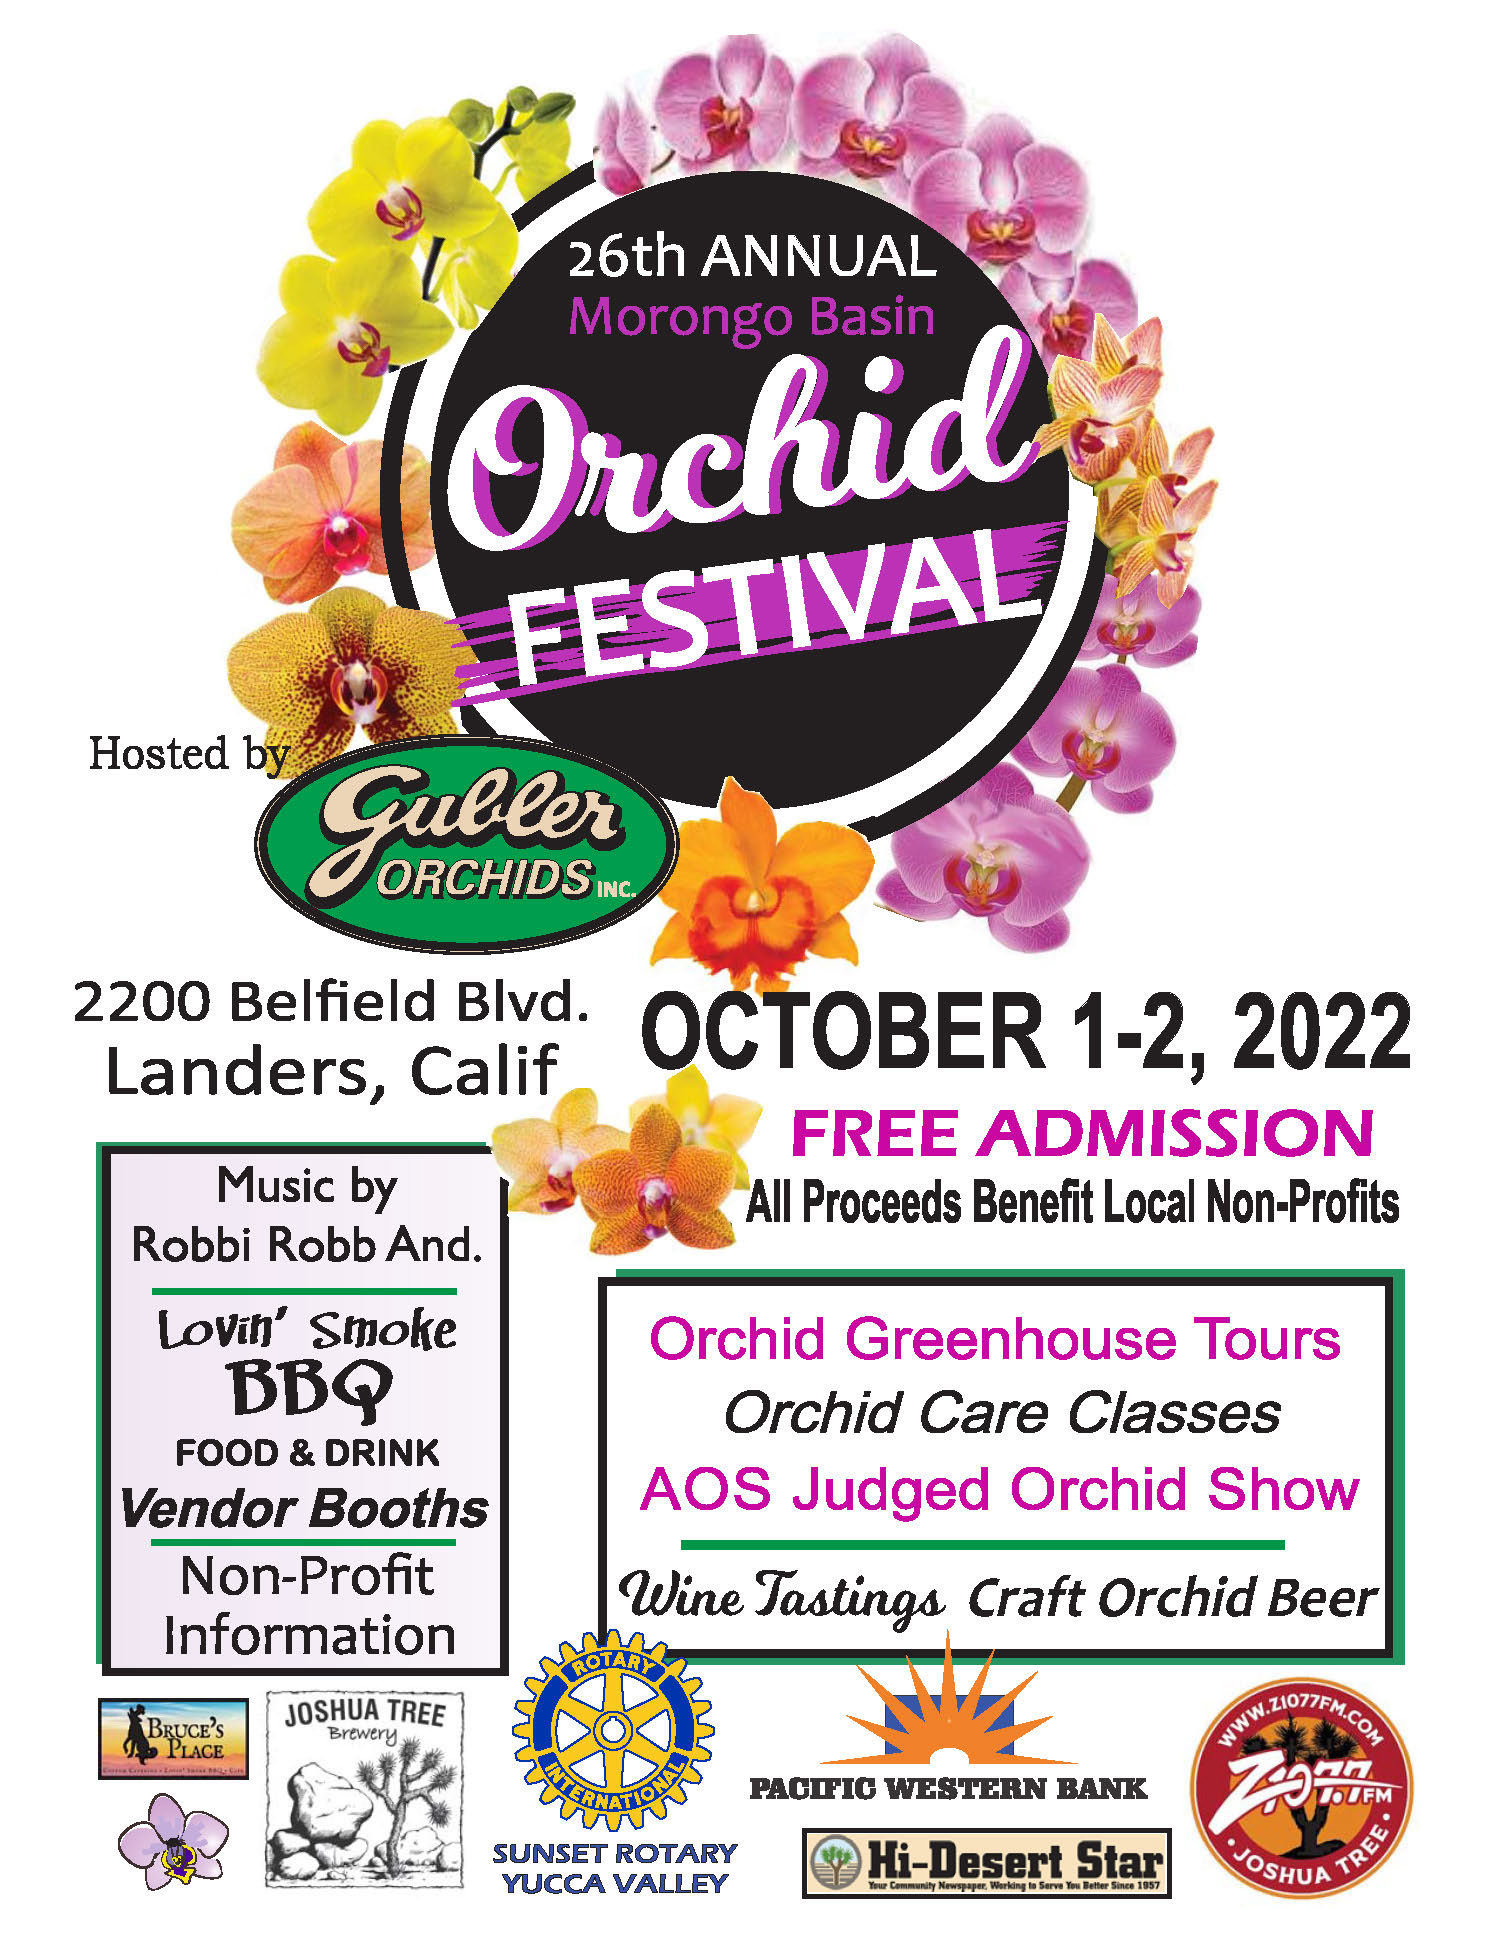 A graphic of the Orchid Festival flyer. Words on the graphic read: 26th Annual Morongo Basin Orchid Festival hosted by Gubler Orchids. 2200 Belfield Blvd Landers, Calif October 1-2, 2022 Free Admission. All proceeds benefit local non-profts. Orchid greenhouse tours, orchid care classes, AOS judged orchid show, wine tastings, craft orchid bee, music by Robbi Robb, Lovin' Smoke BBQ food and drink, vendor booths, non-profits information. Logos shown on flyer include: Bruce's Place, Joshua Tree Brewery, Sunset Rotary Yucca Valley, Pacific Western Bank, Hi-Desert Star, Z107.7FM